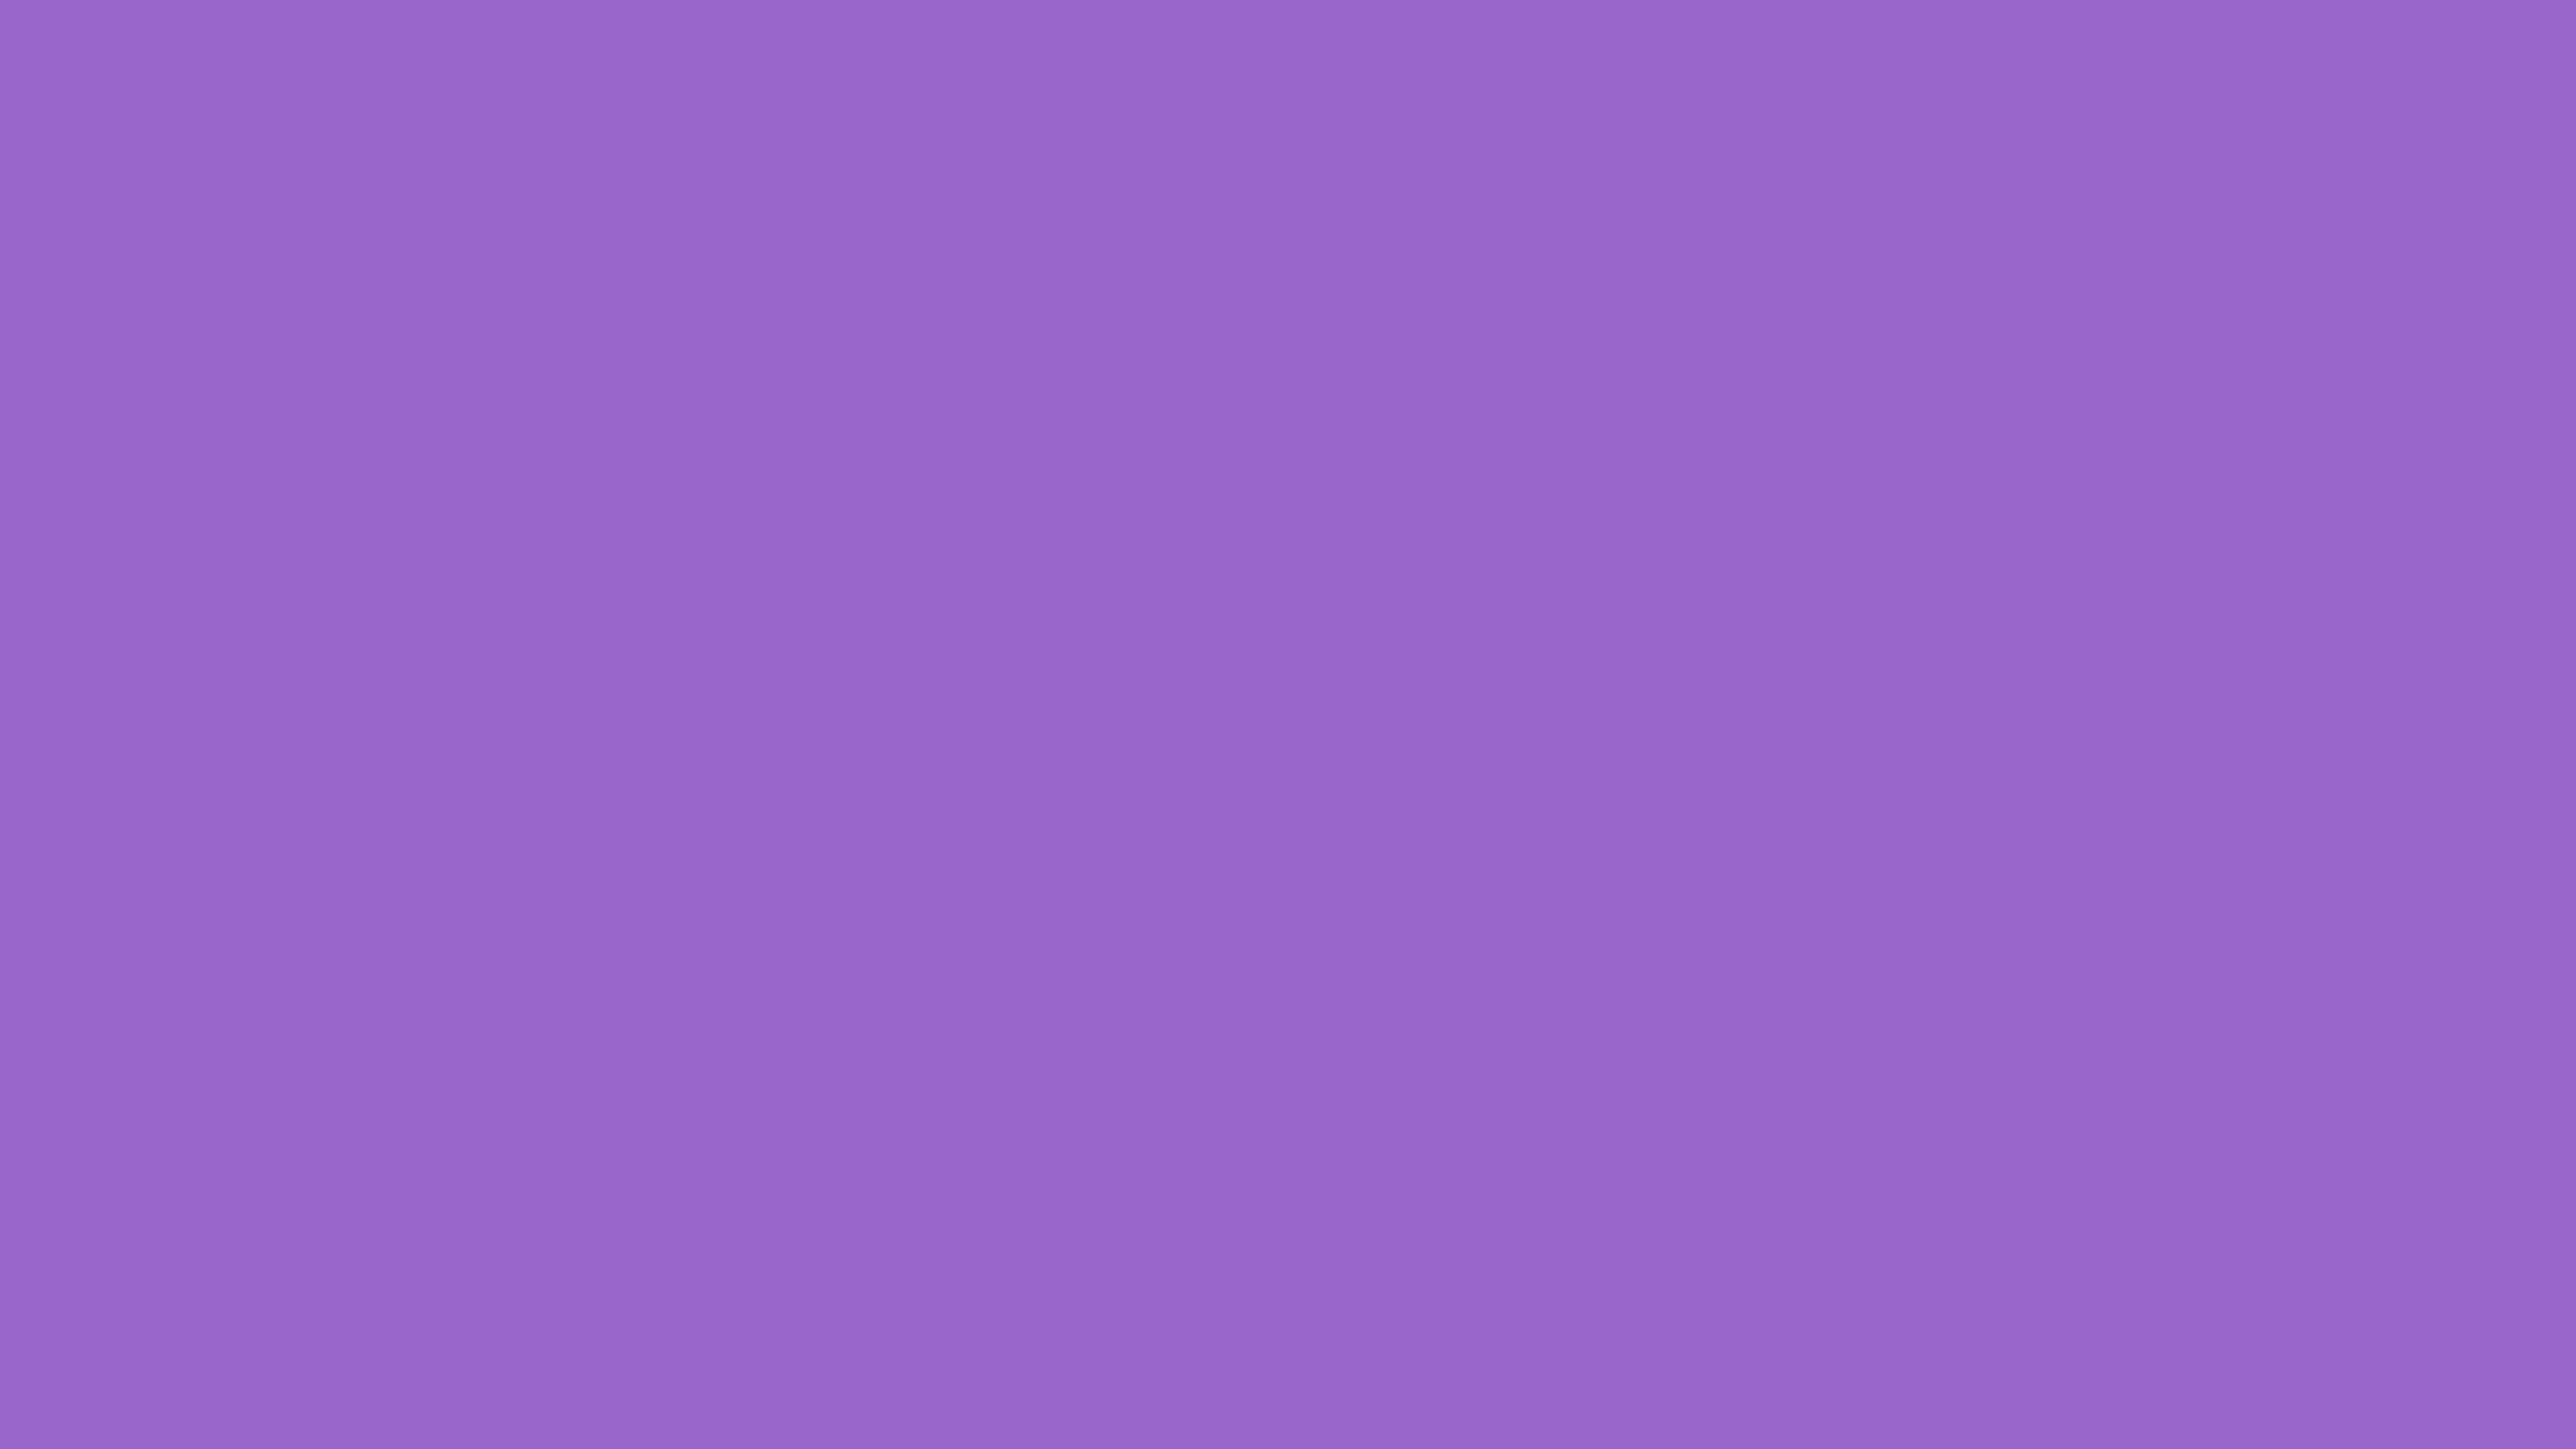 7680x4320 Amethyst Solid Color Background